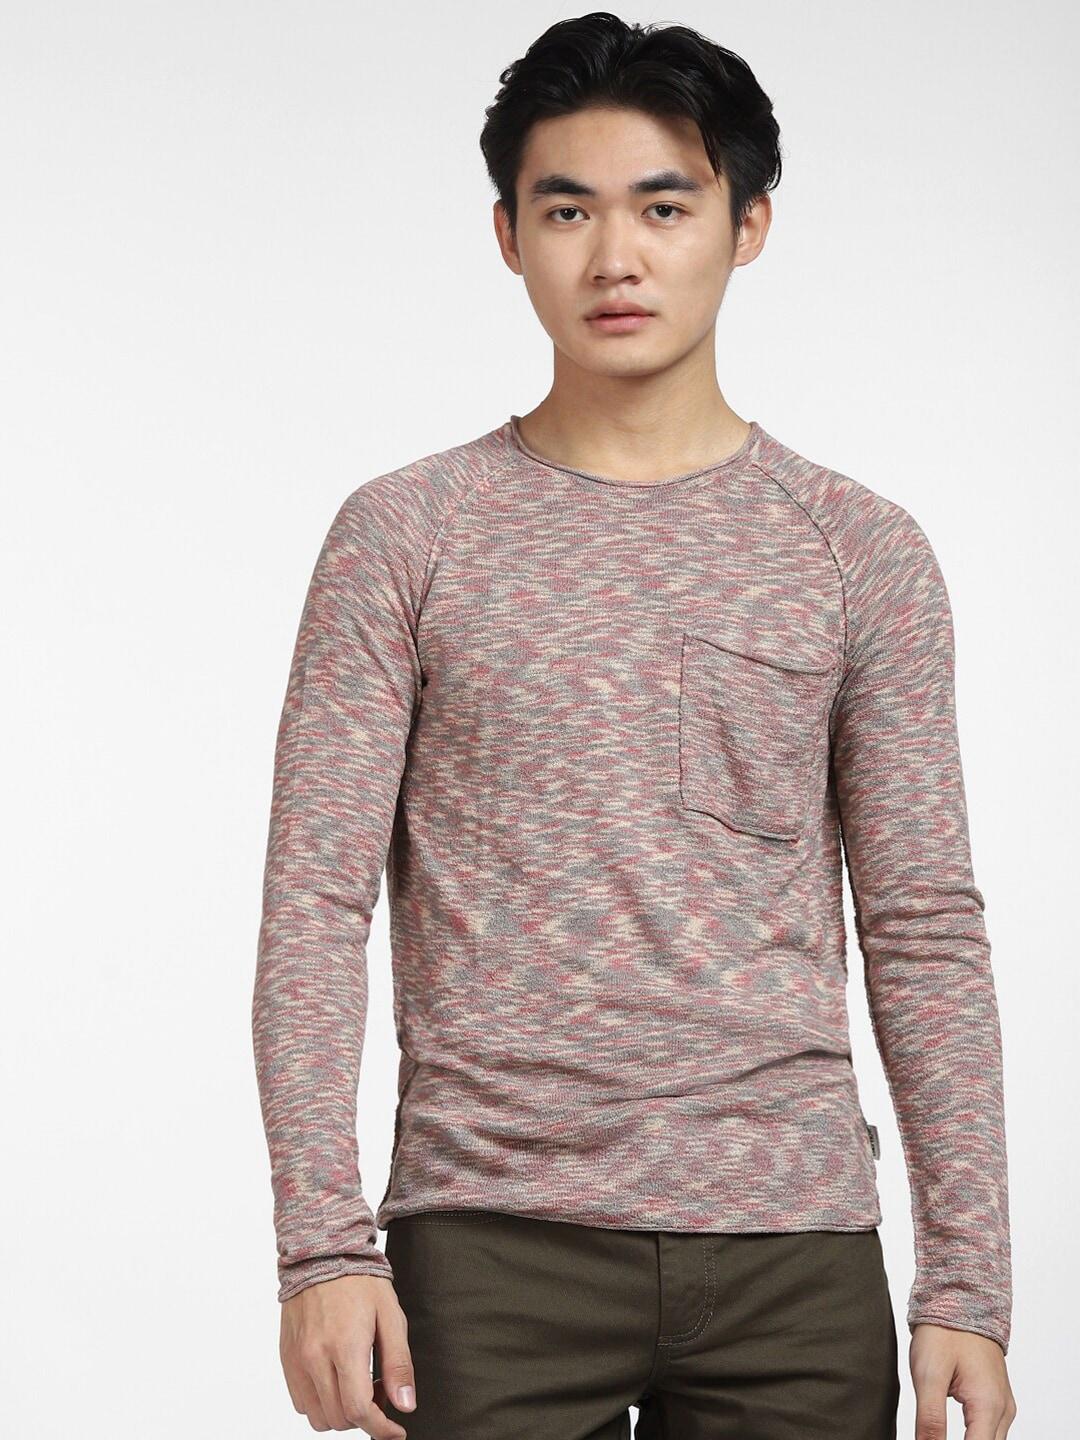 Jack & Jones Men Mauve & Off White Abstract Printed Pullover Sweater